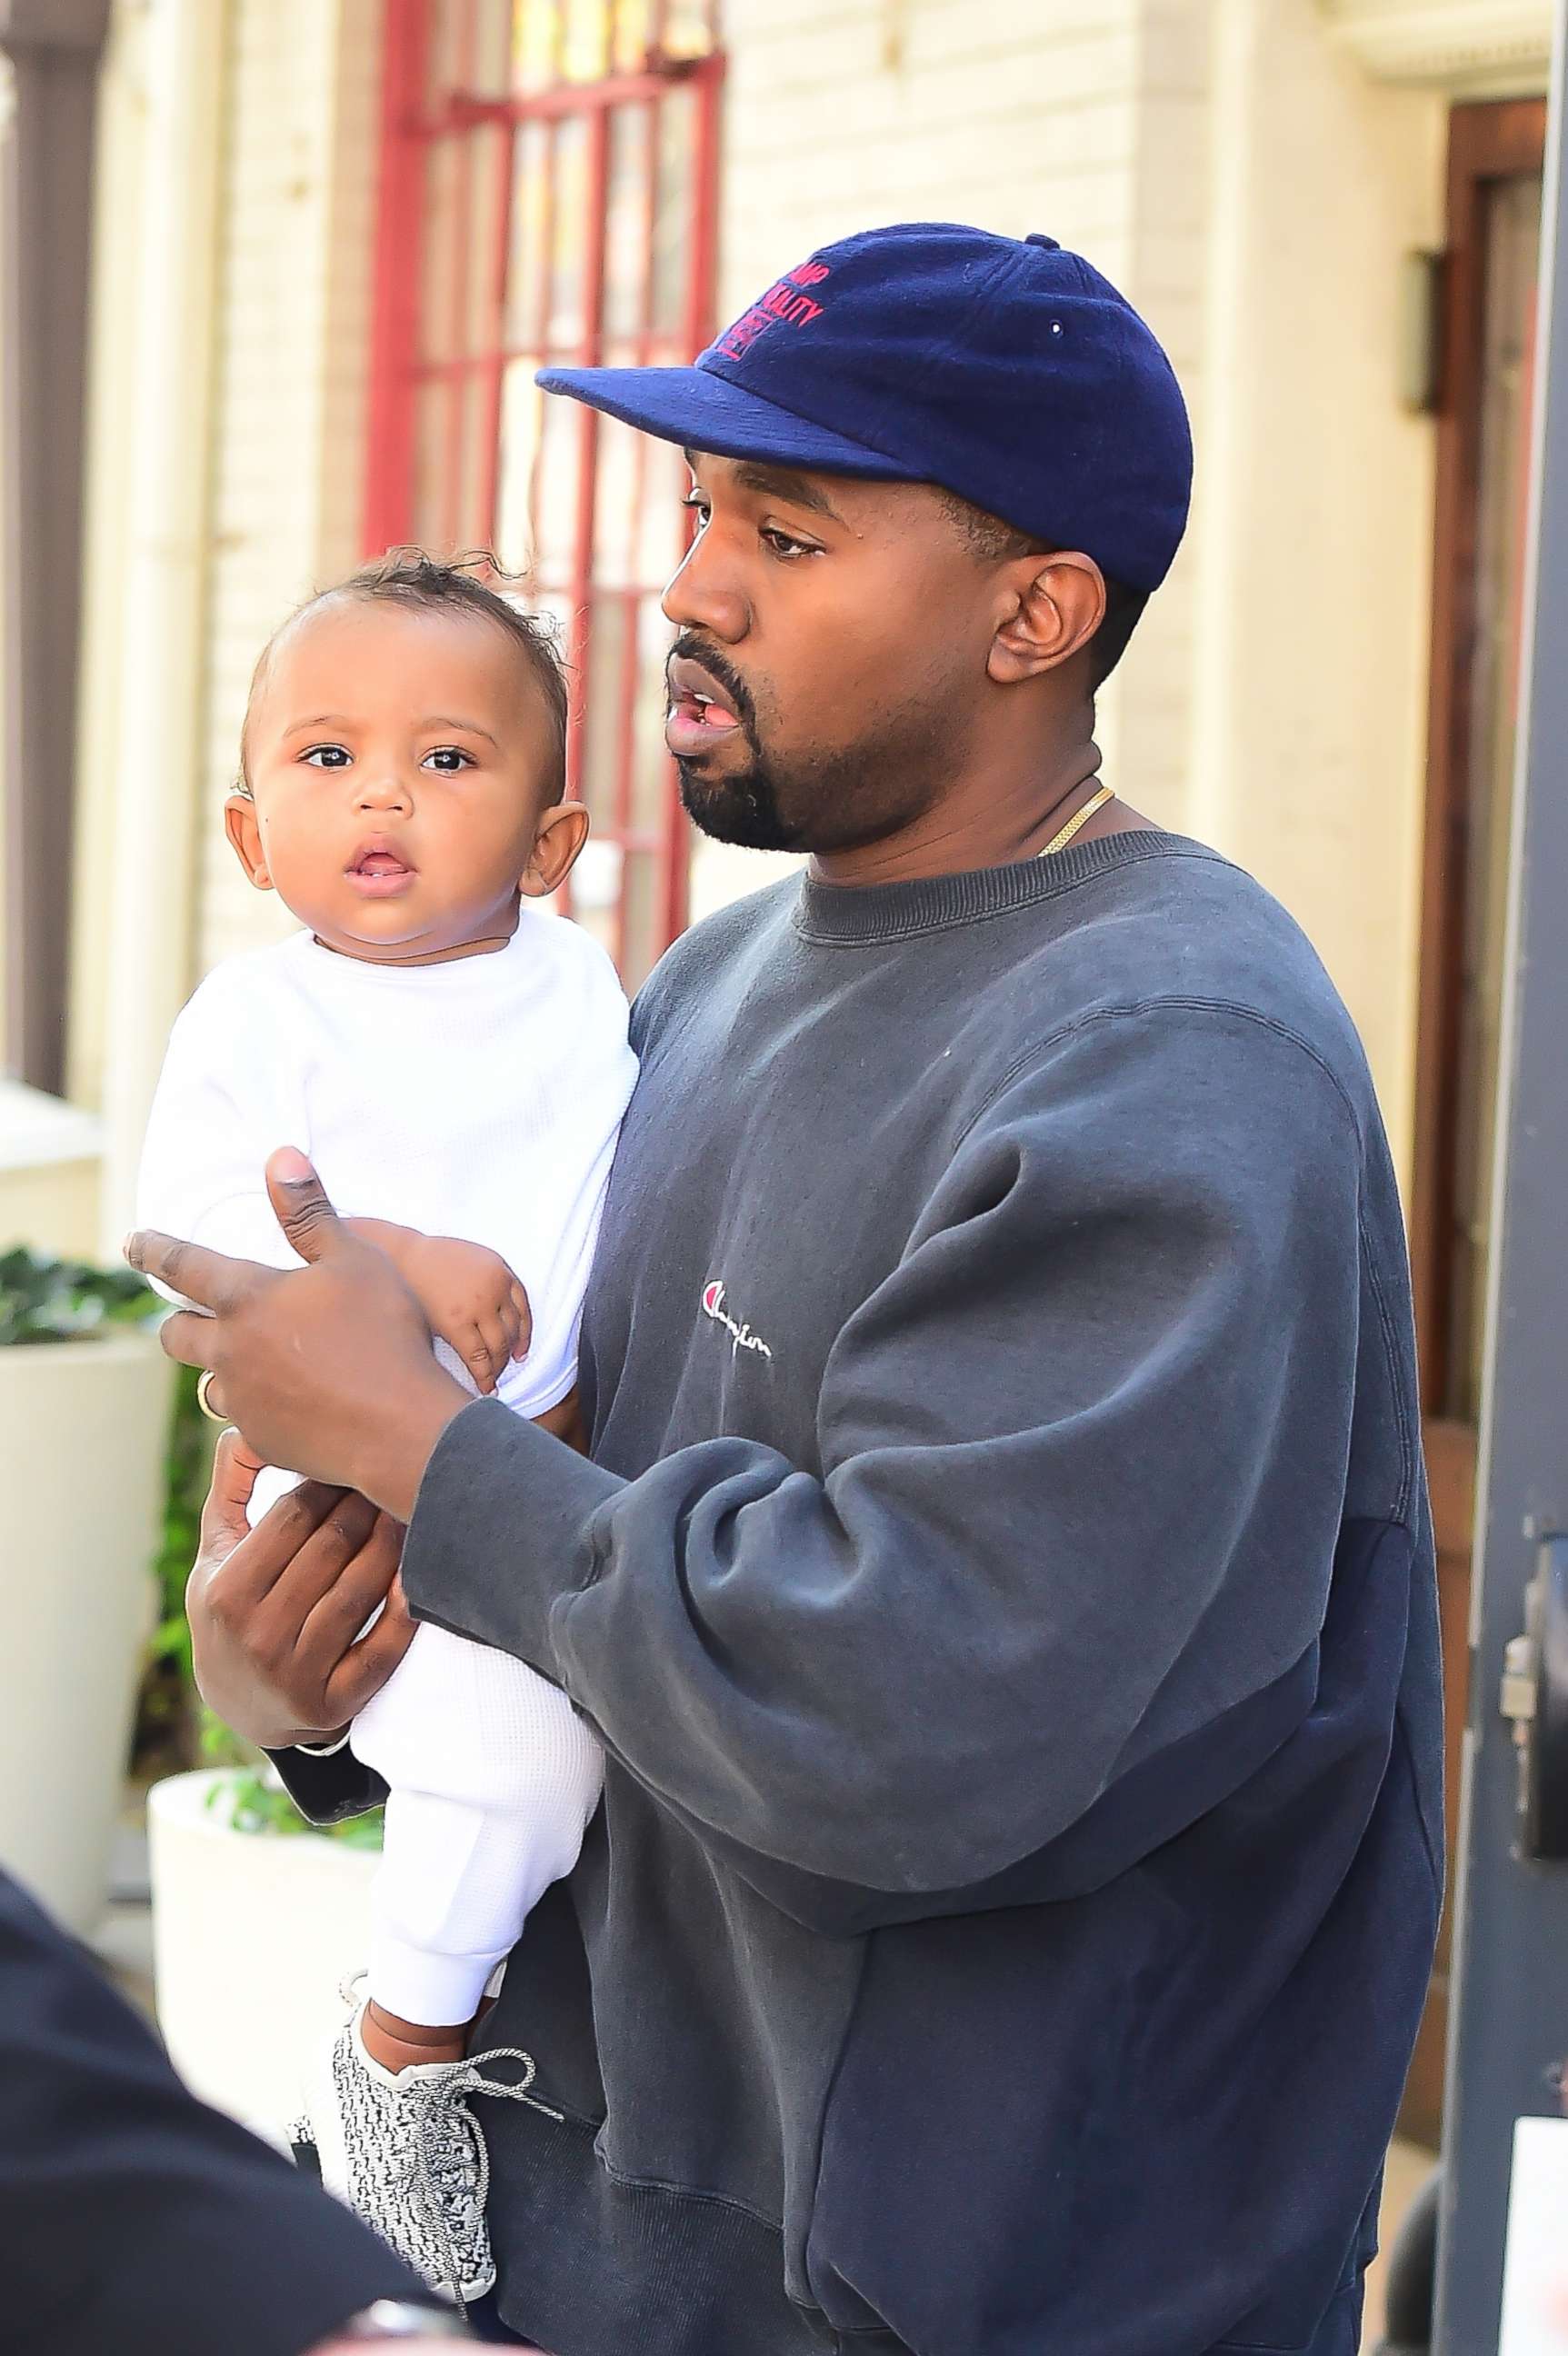 PHOTO: Kanye West holds his son Saint West on a walk in Soho in New York City on October 6, 2016.